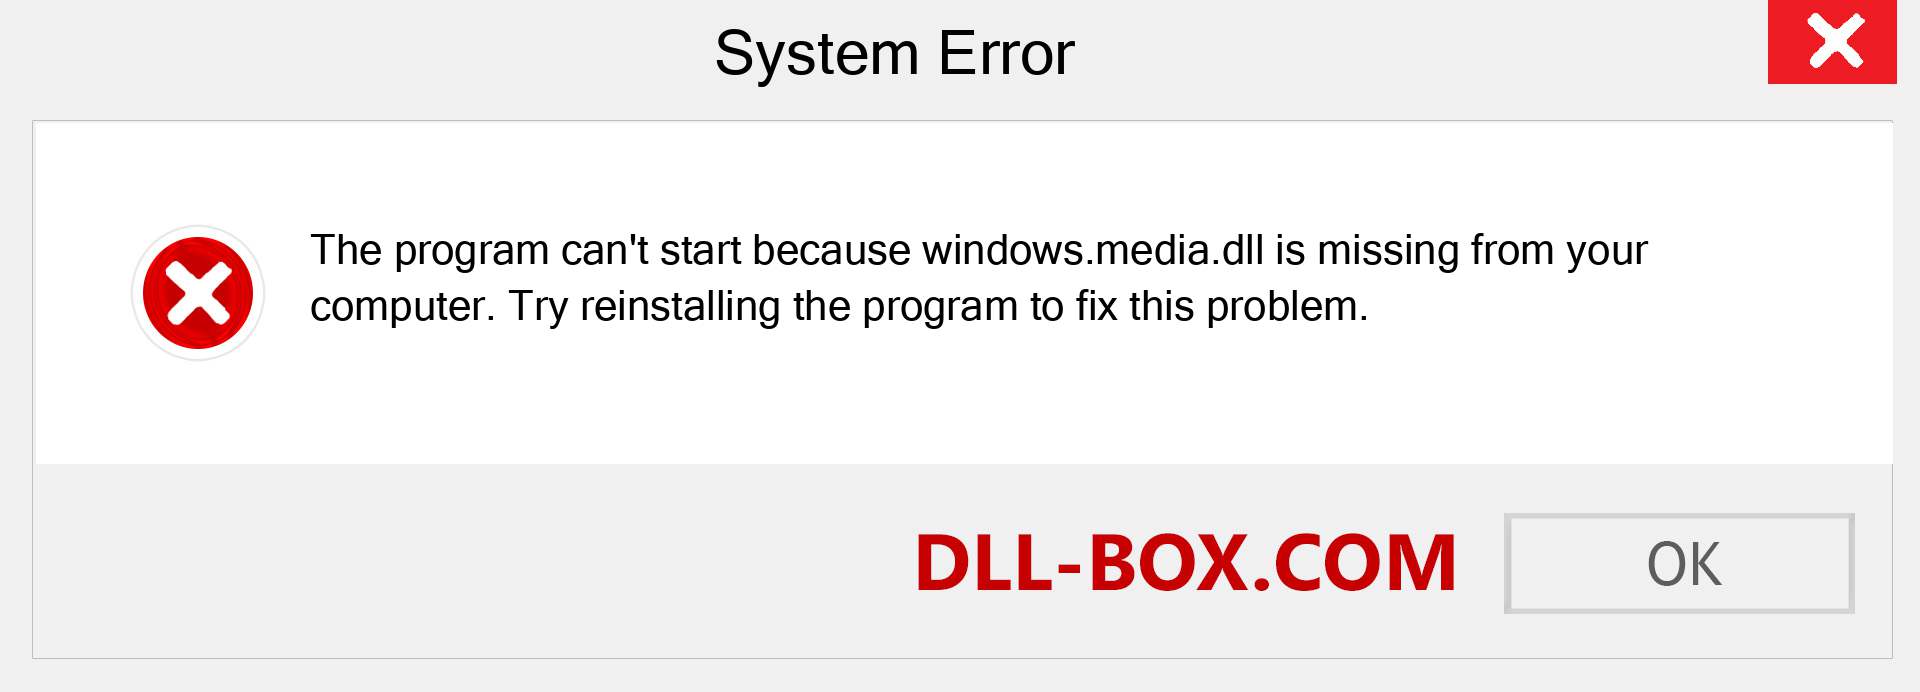  windows.media.dll file is missing?. Download for Windows 7, 8, 10 - Fix  windows.media dll Missing Error on Windows, photos, images